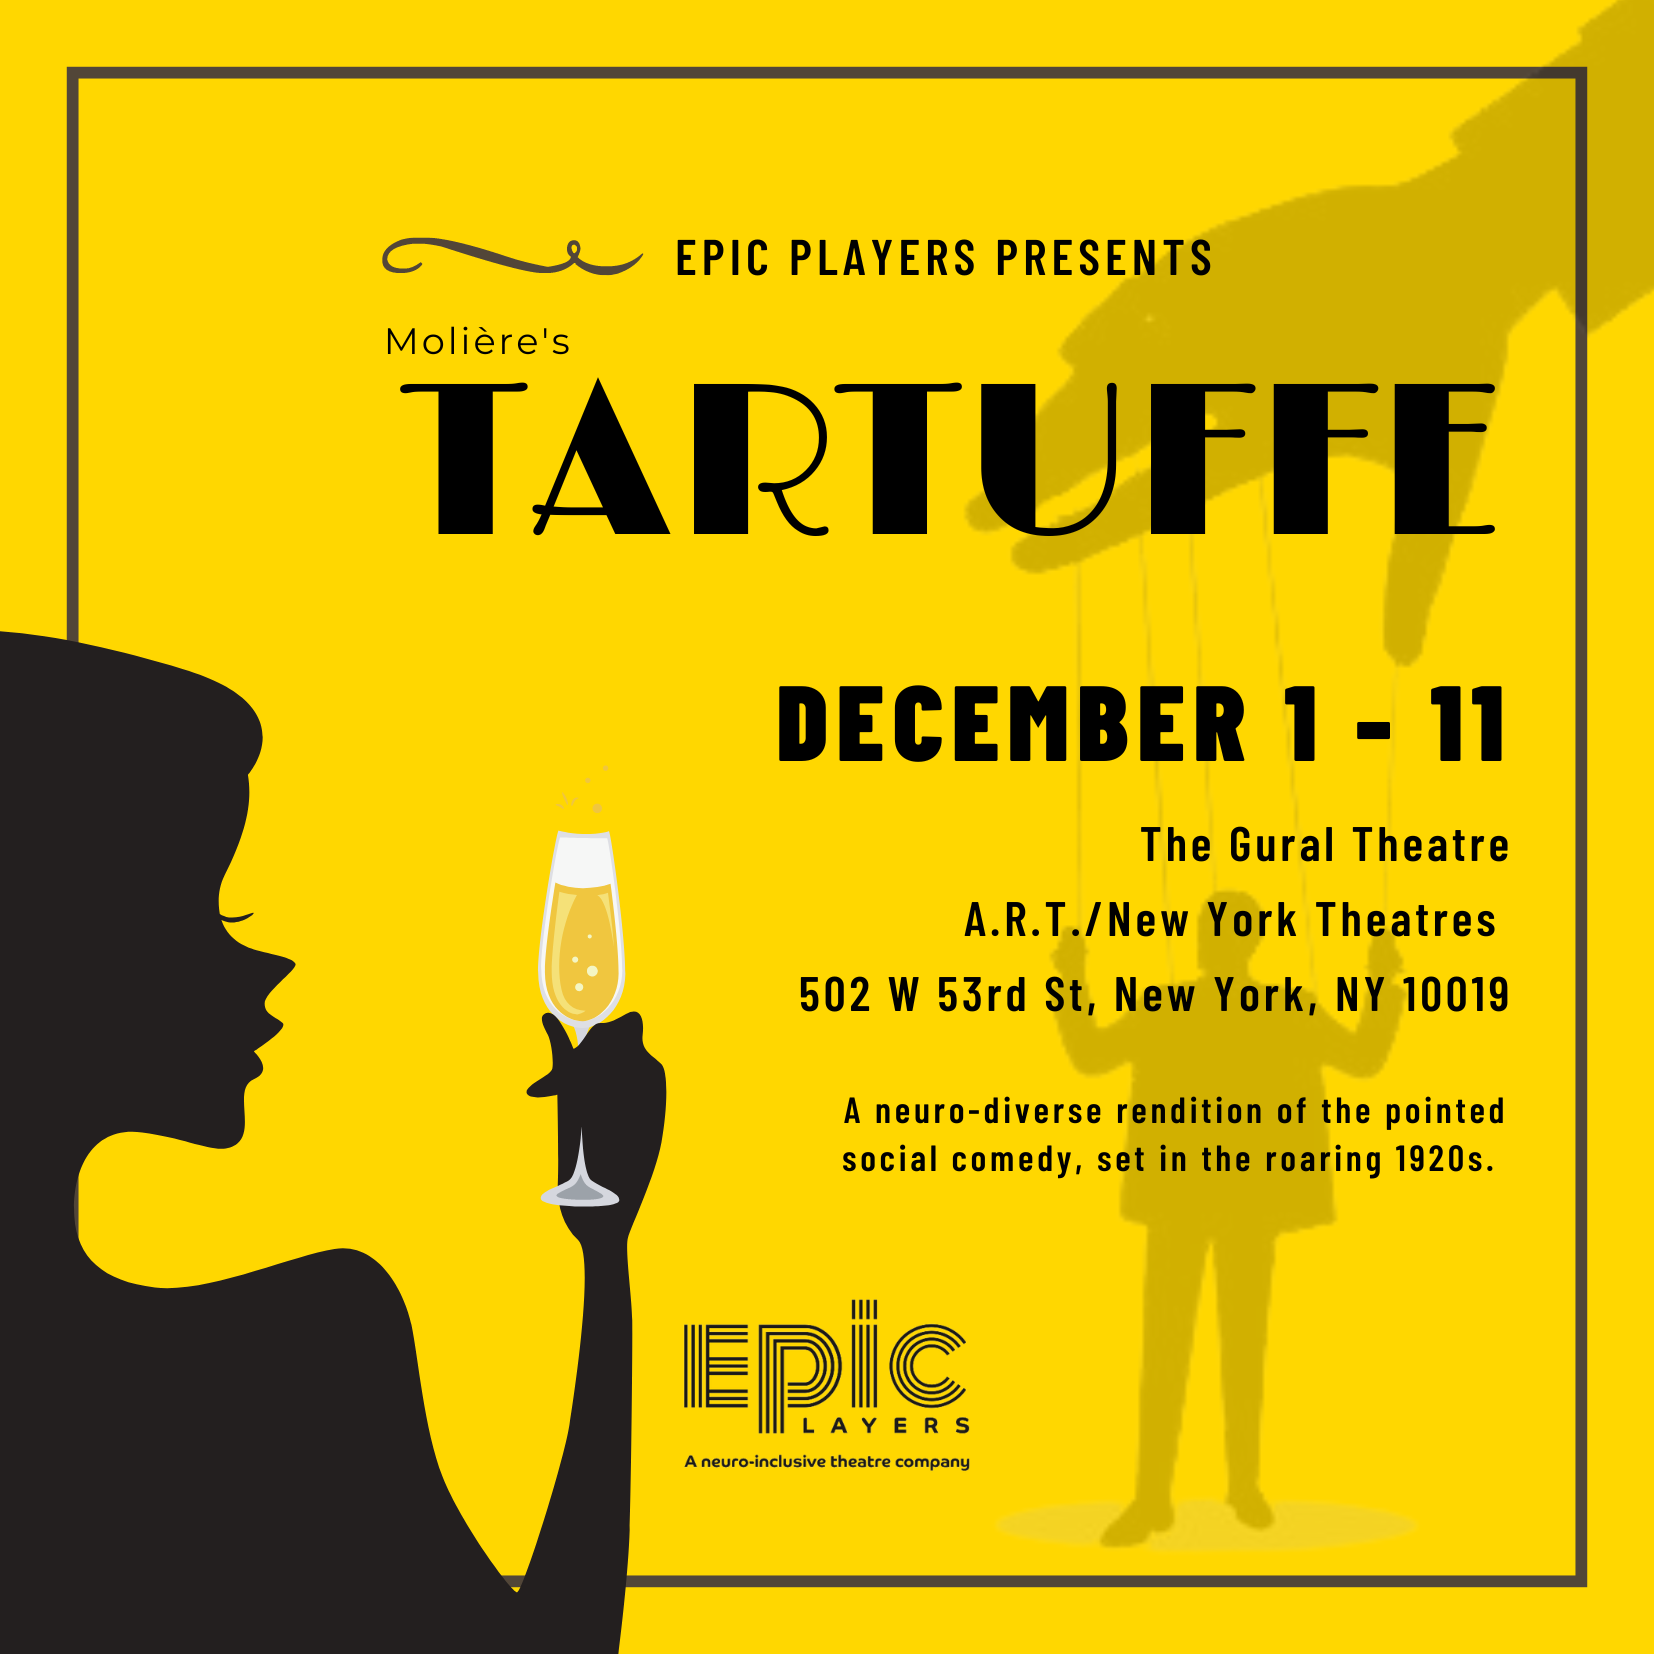 Logo for Tartuffe. Black text on a bright yellow background - Tartuffe, December 1-11. In the lower left hand corner a woman is in silhouette holding a glass of champagne. In the background on the right side of the image, a marionette is cast in shadow. 